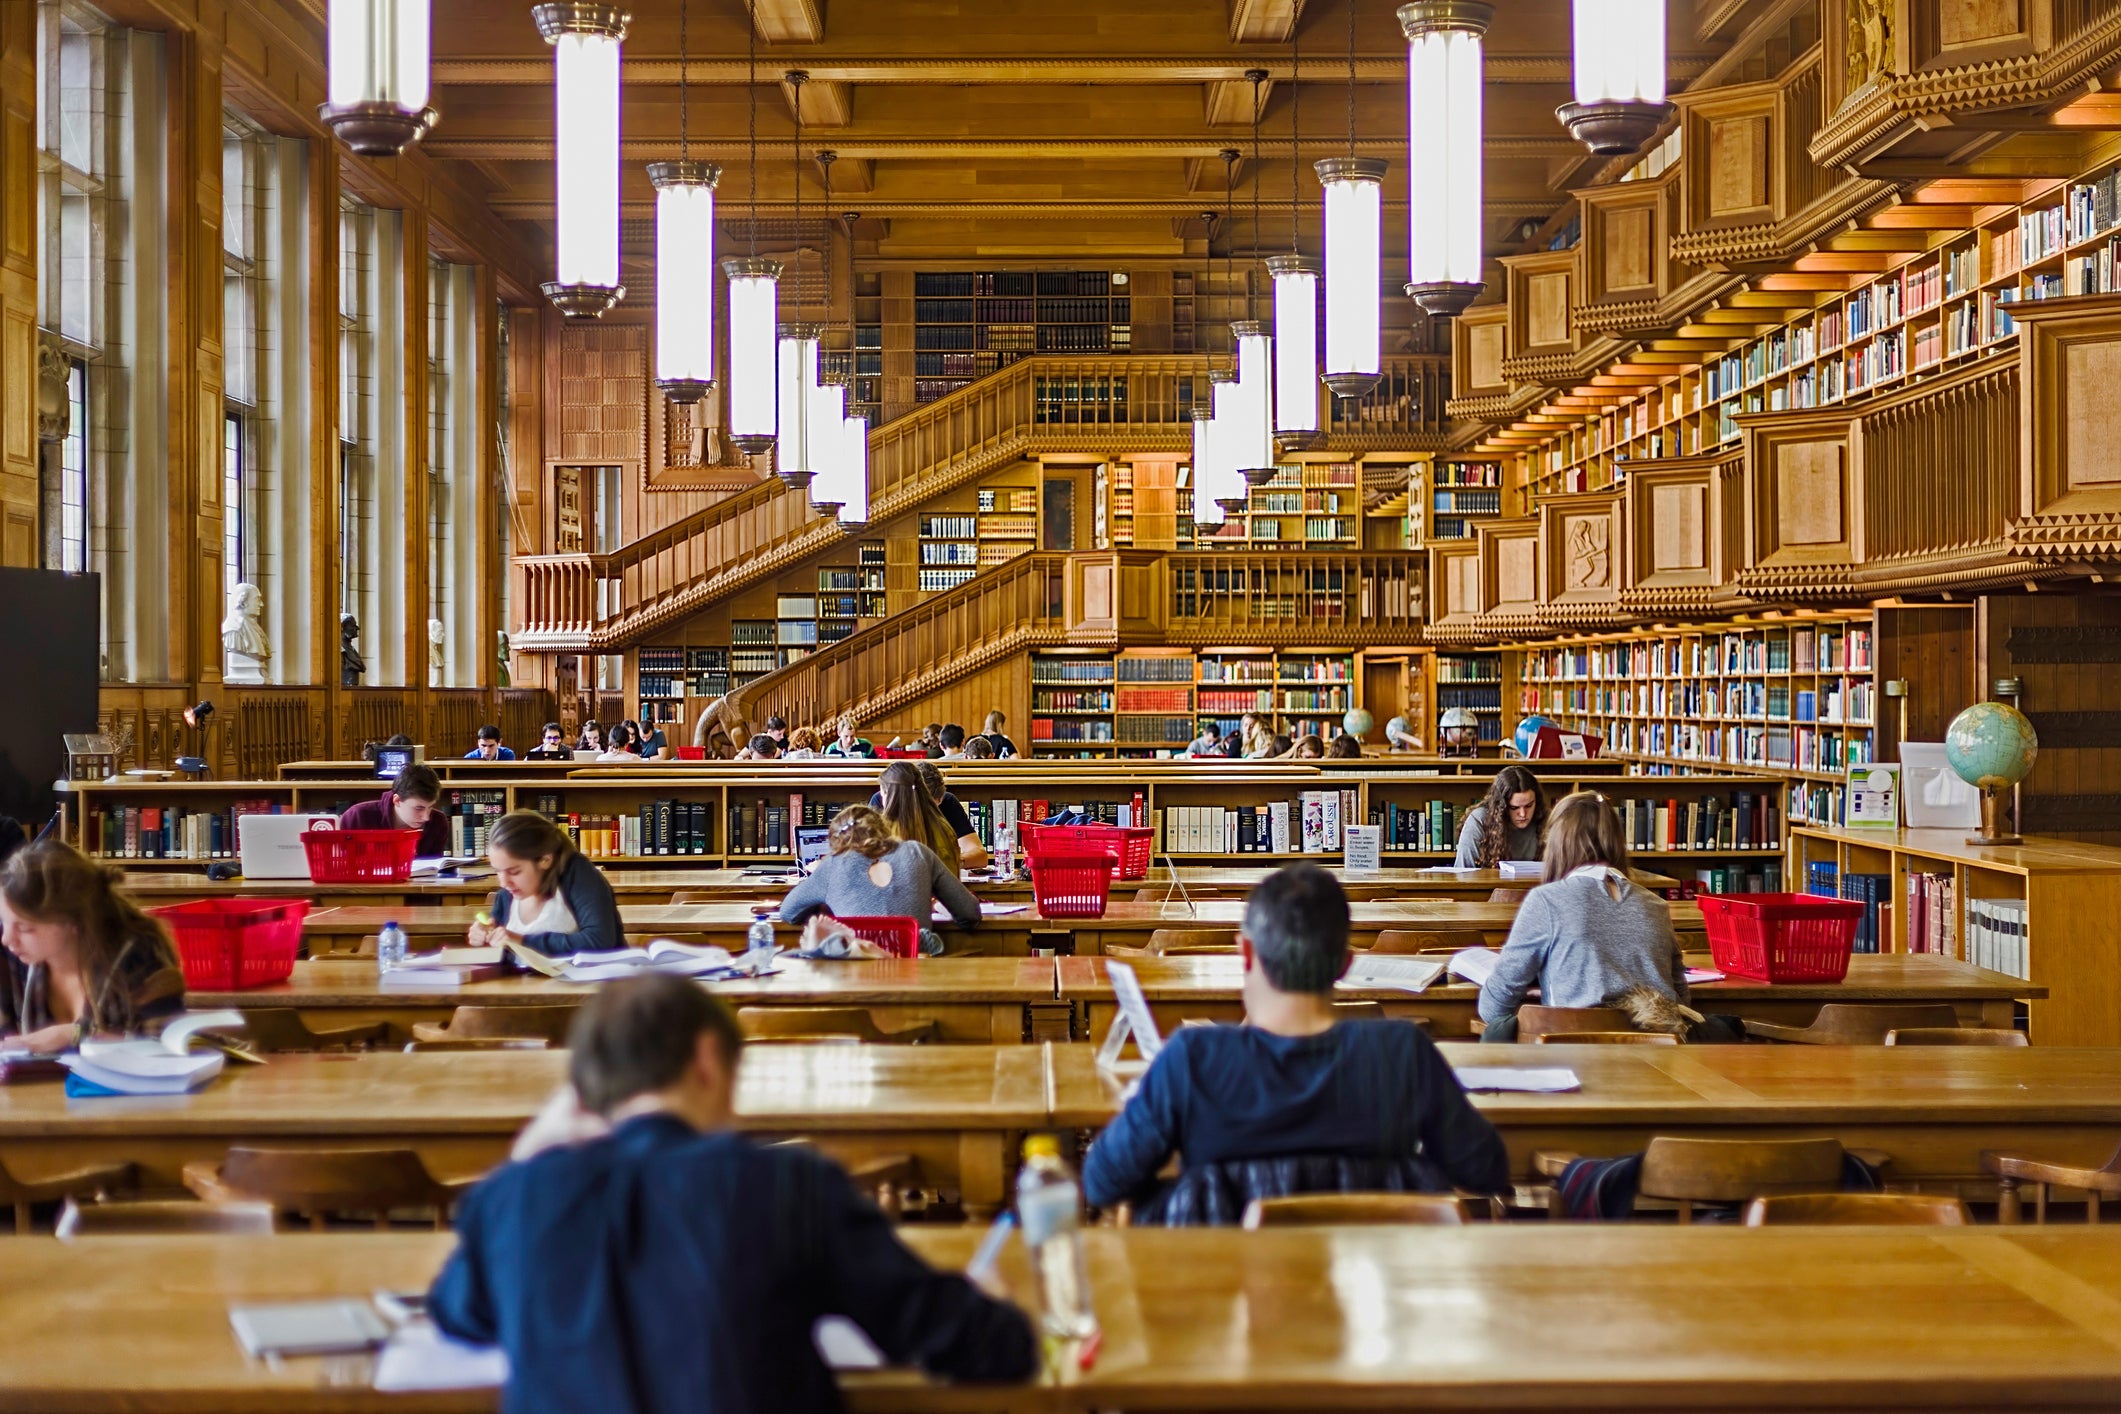 Students studying inside the library of the university of Leuven, Belgium